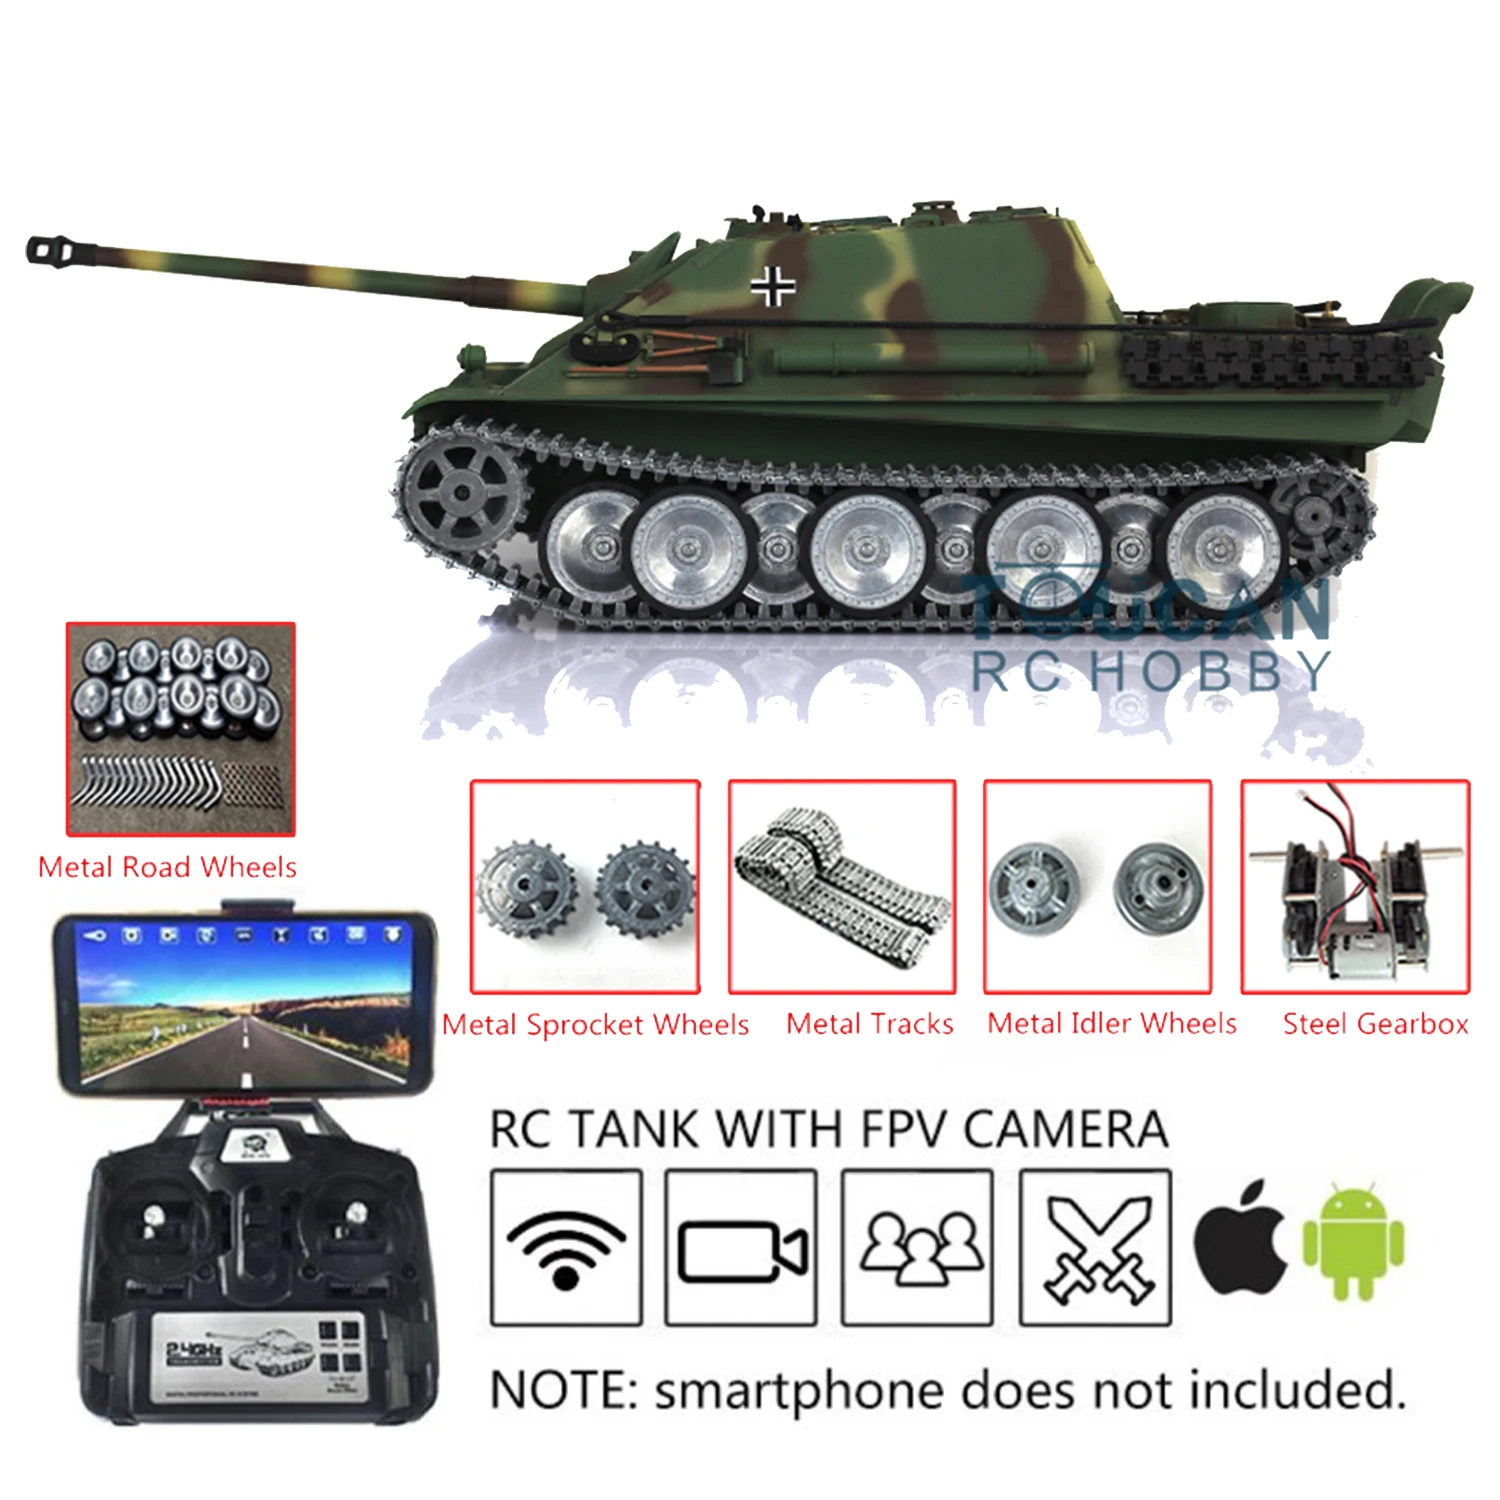 

HENG LONG 1/16 7.0 Customized Jadpanther RTR RC Tank 3869 FPV Metal Tracks Wheels TH17442-SMT4